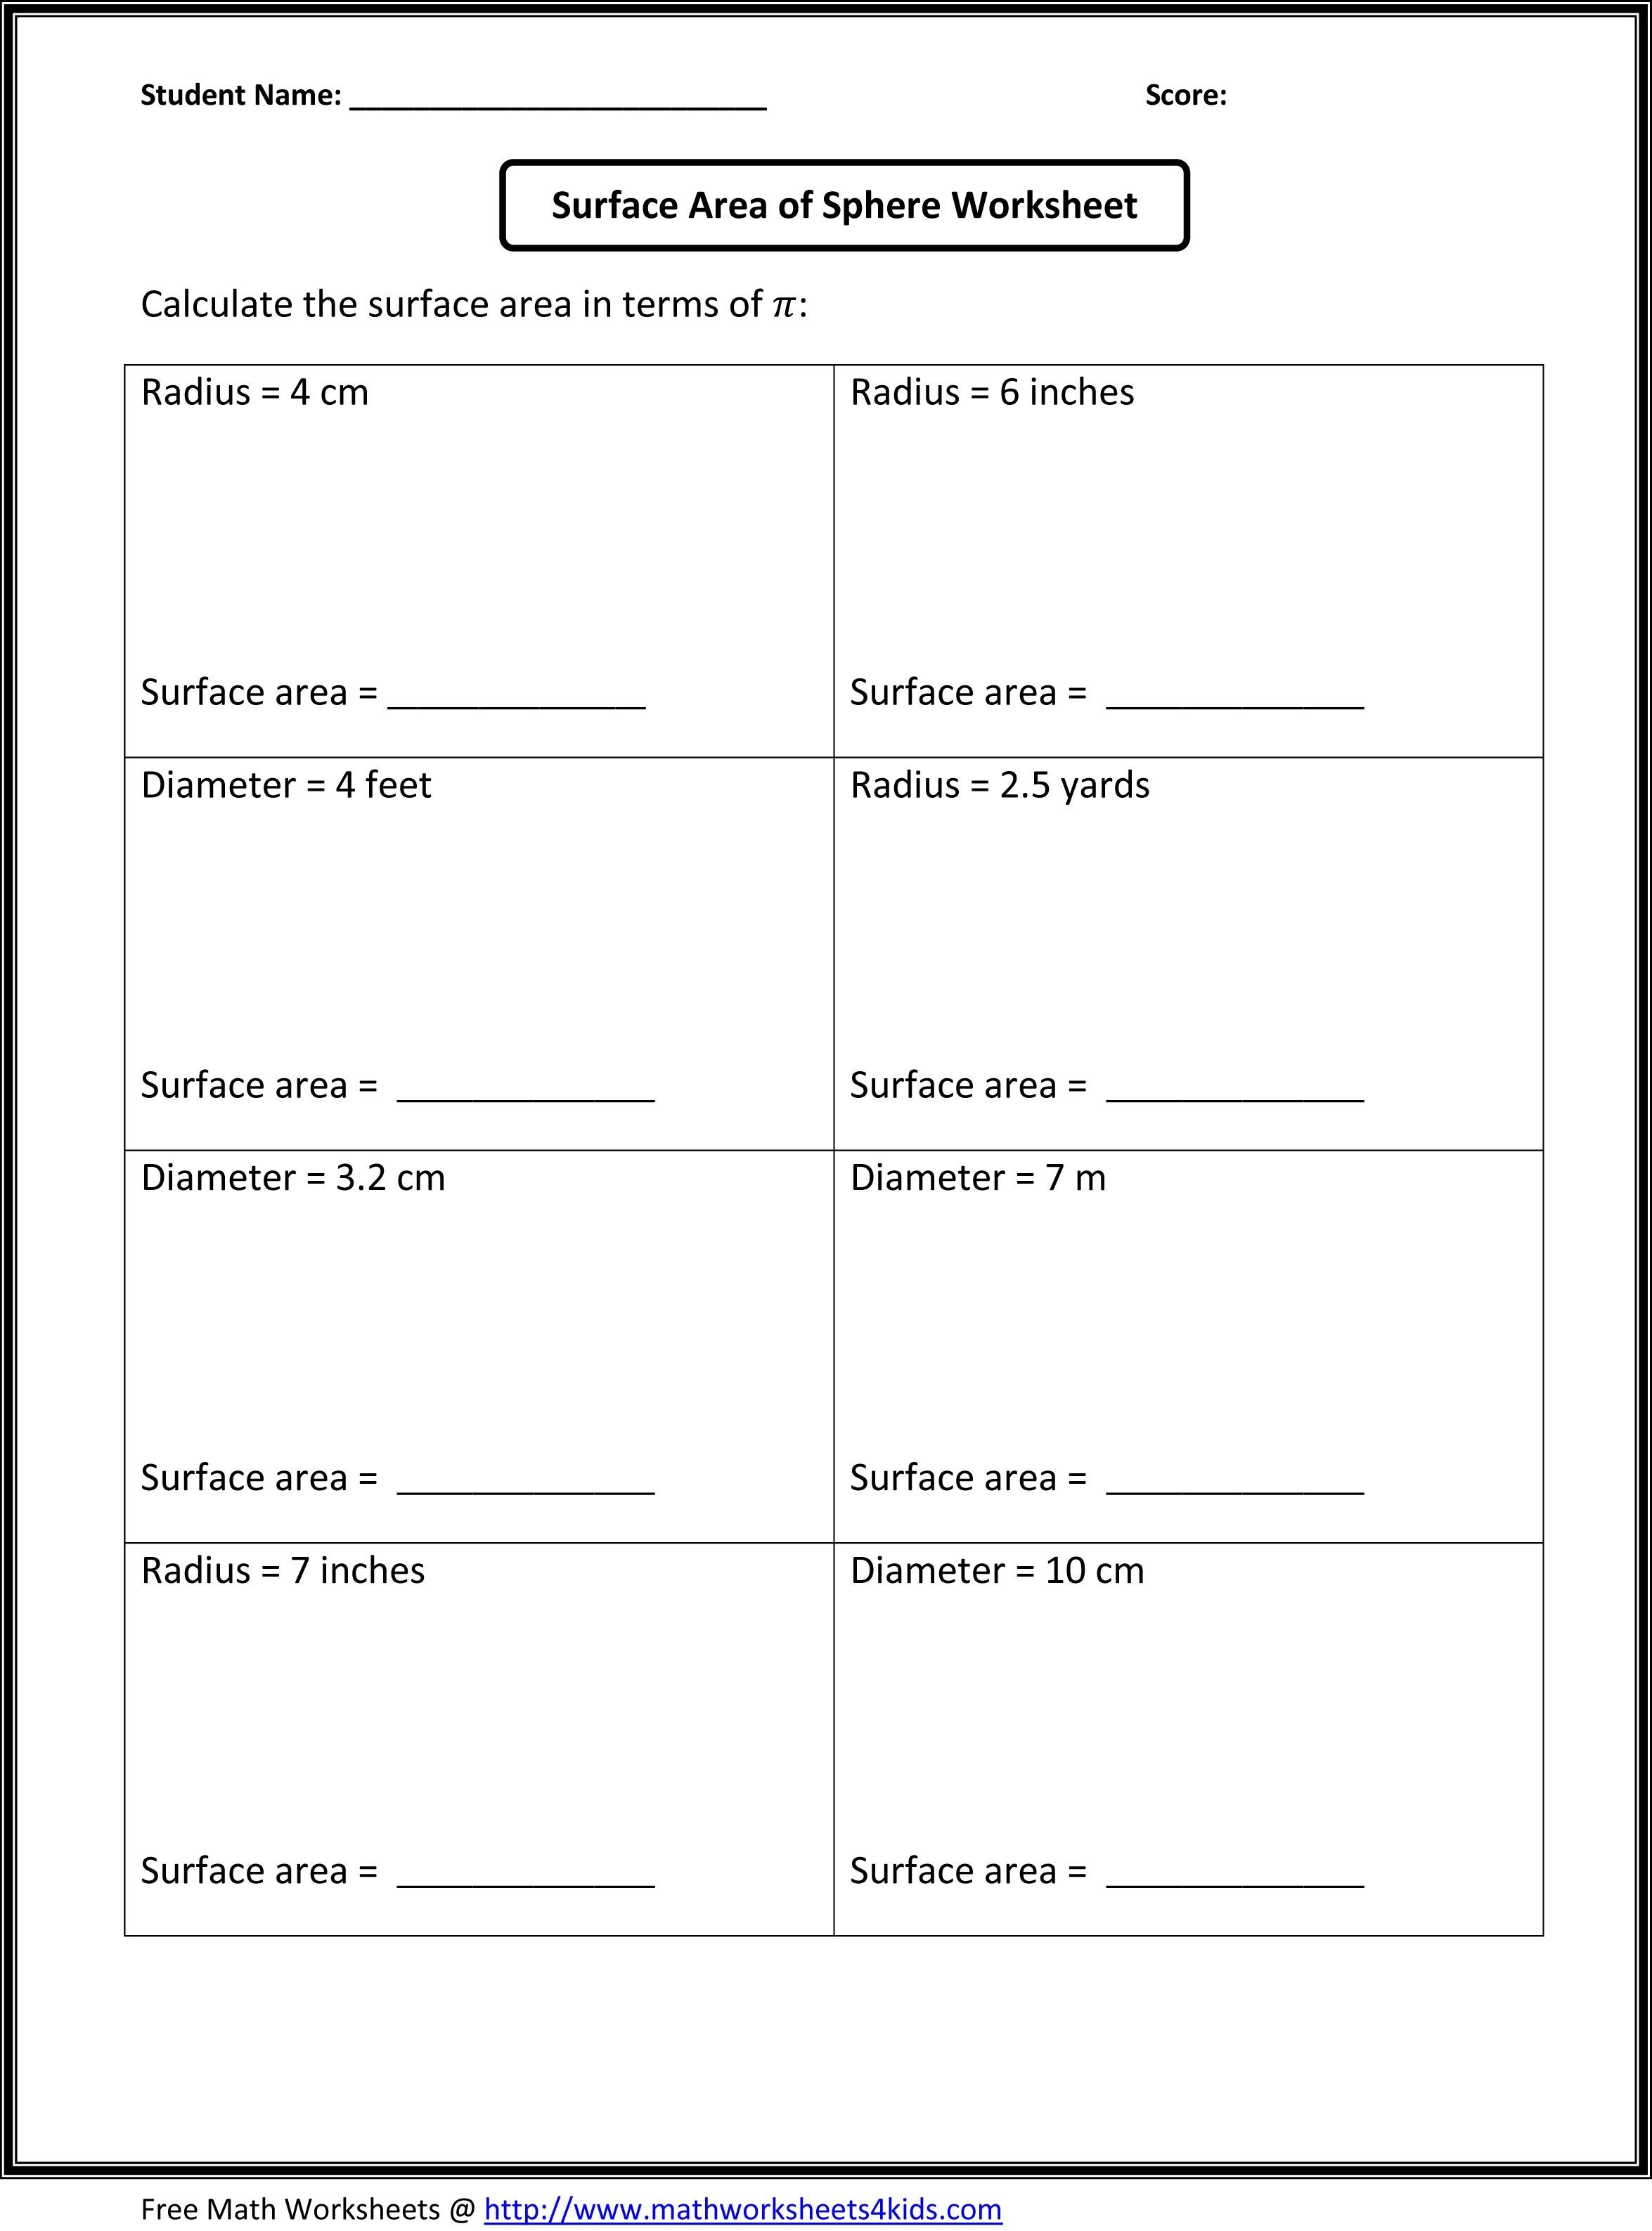 free-ged-worksheets-oaklandeffect-free-printable-ged-worksheets-free-printable-a-to-z